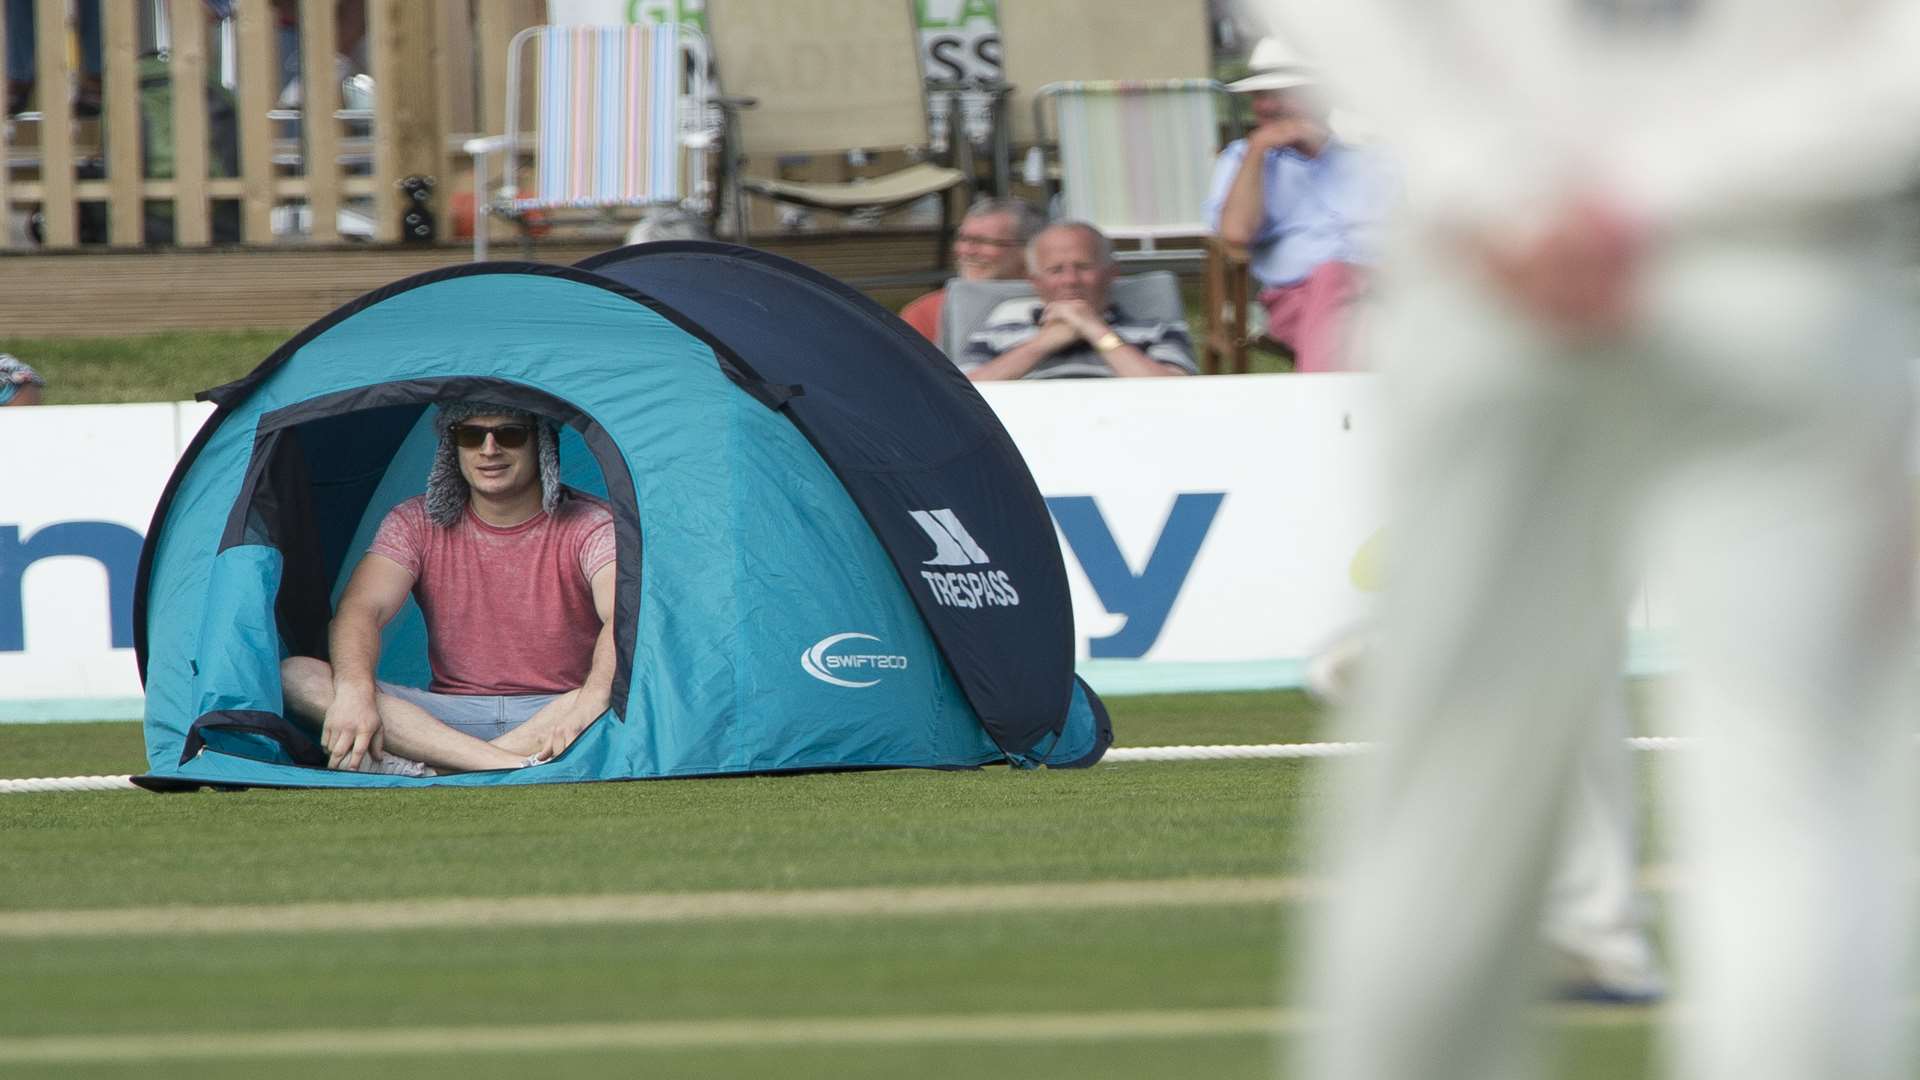 Players look on bewildered as prankster pitches tent in the outfield. Pic: Ady Kerry